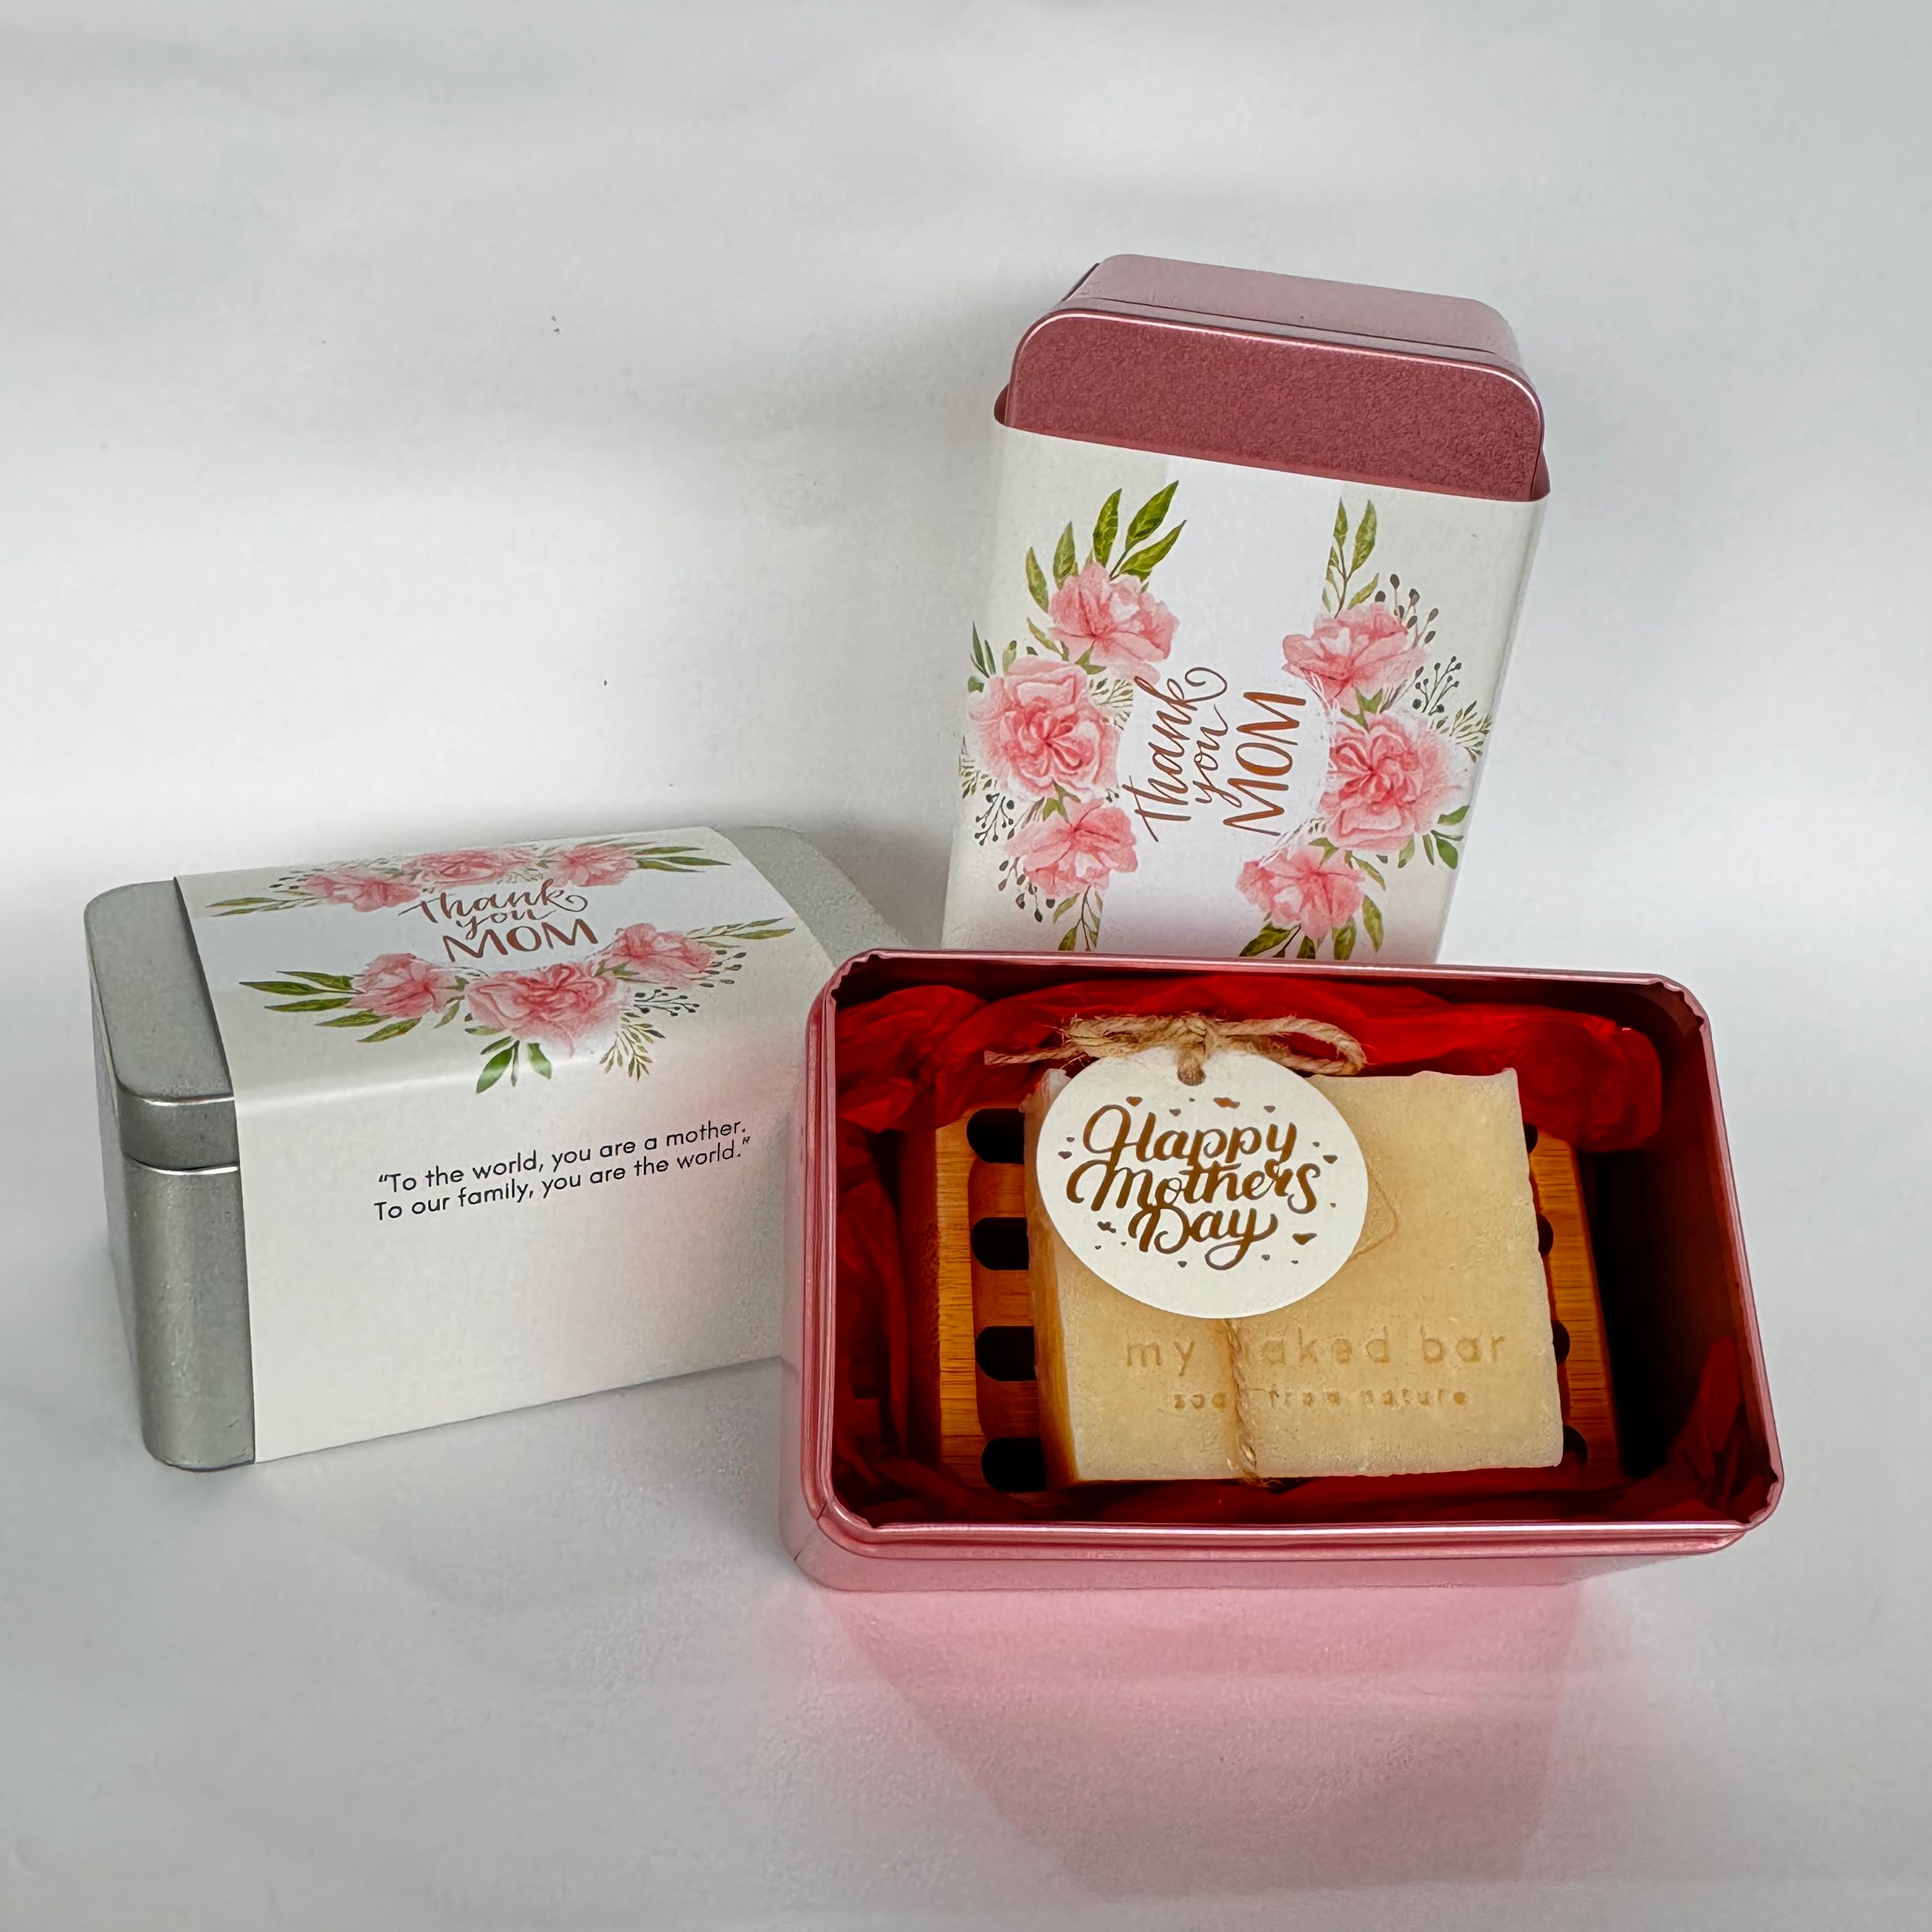 My Naked Bar Mother's Day Rice Milk Bar Gift Set | Gifting | The Green Collective SG